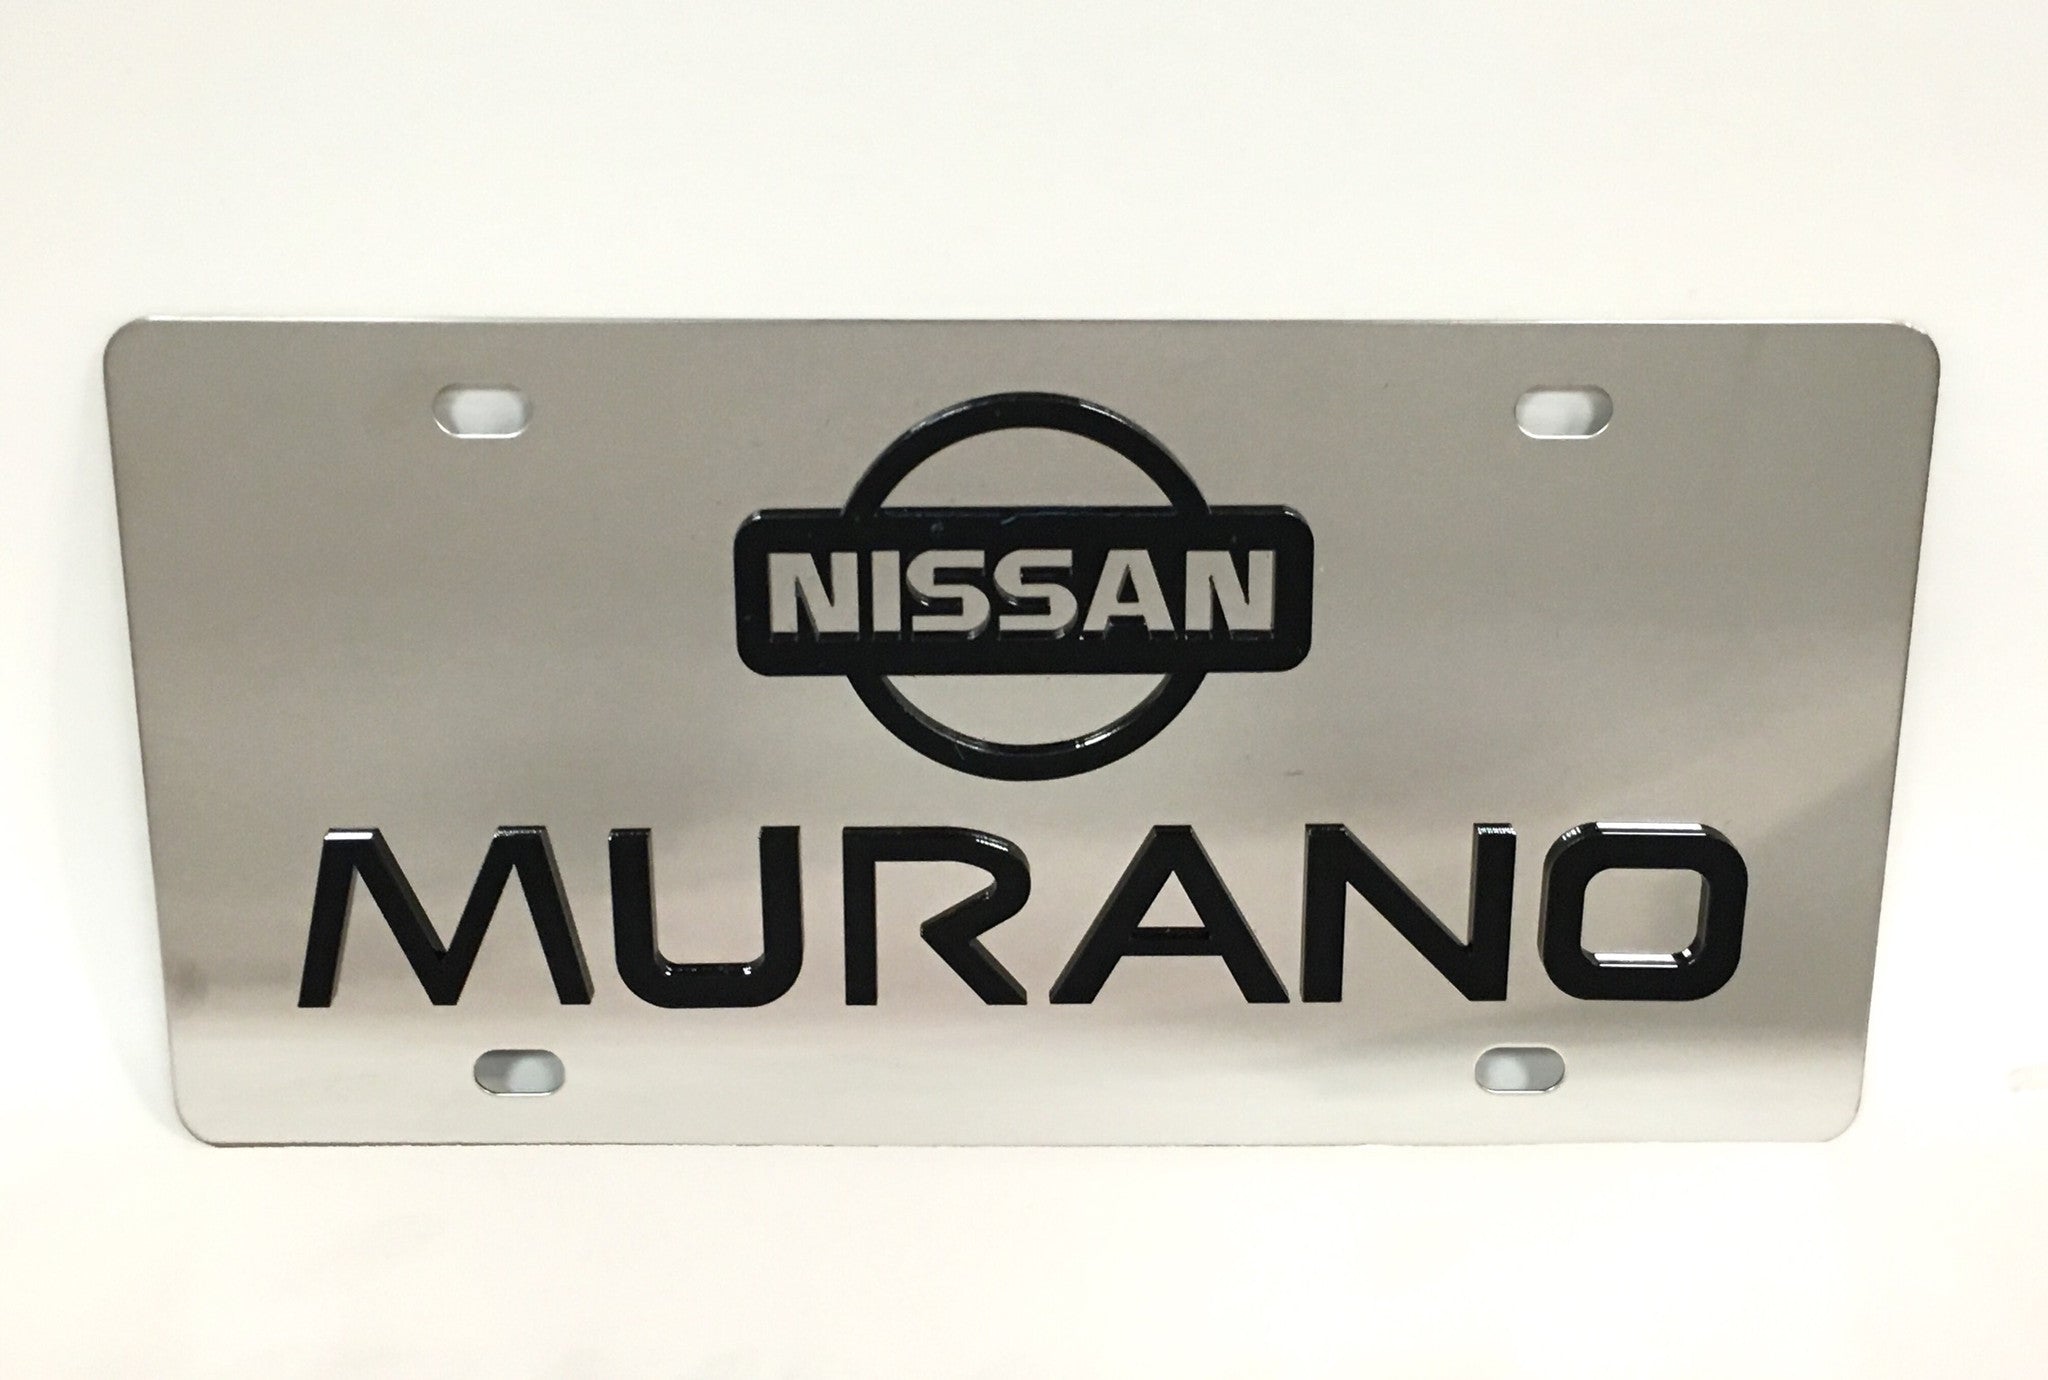 Nissan Murano Stainless Steel License Plate